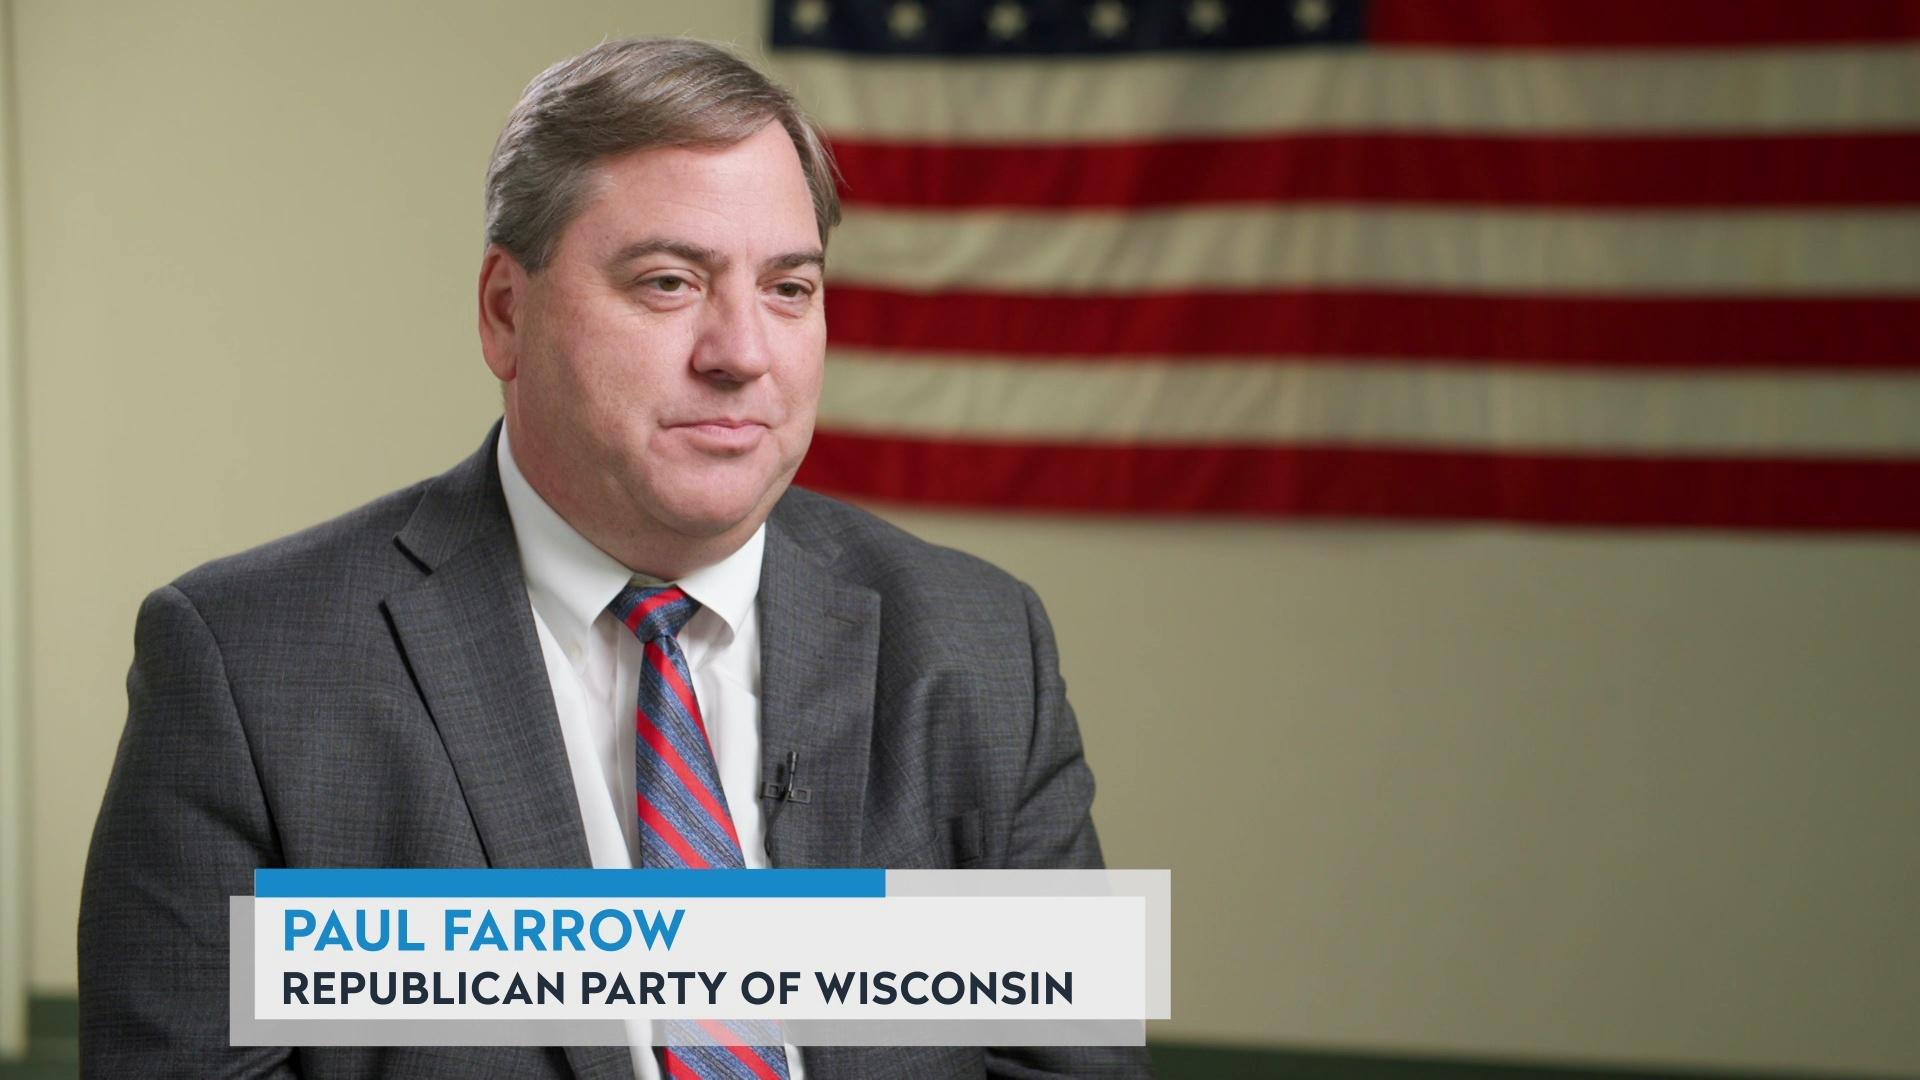 Paul Farrow on Wisconsin voters and 2022 election security